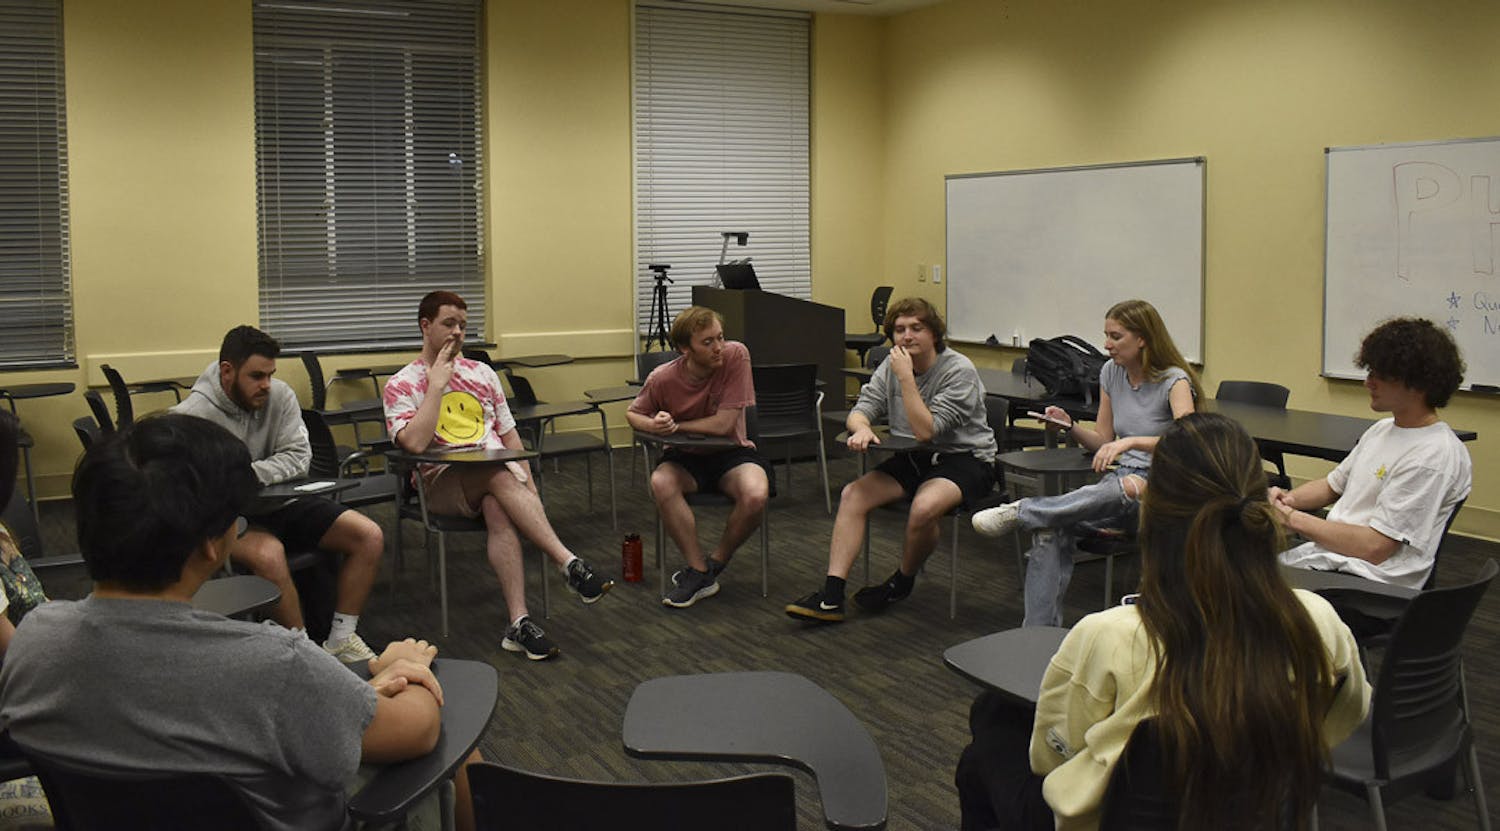 The Carolina Philosophy Club engages in a discussion about social norms on Feb. 21, 2023. The club is open to all ɫɫƵ ɫɫƵs and meets on Tuesdays at 7 p.m. in Petigru 213.